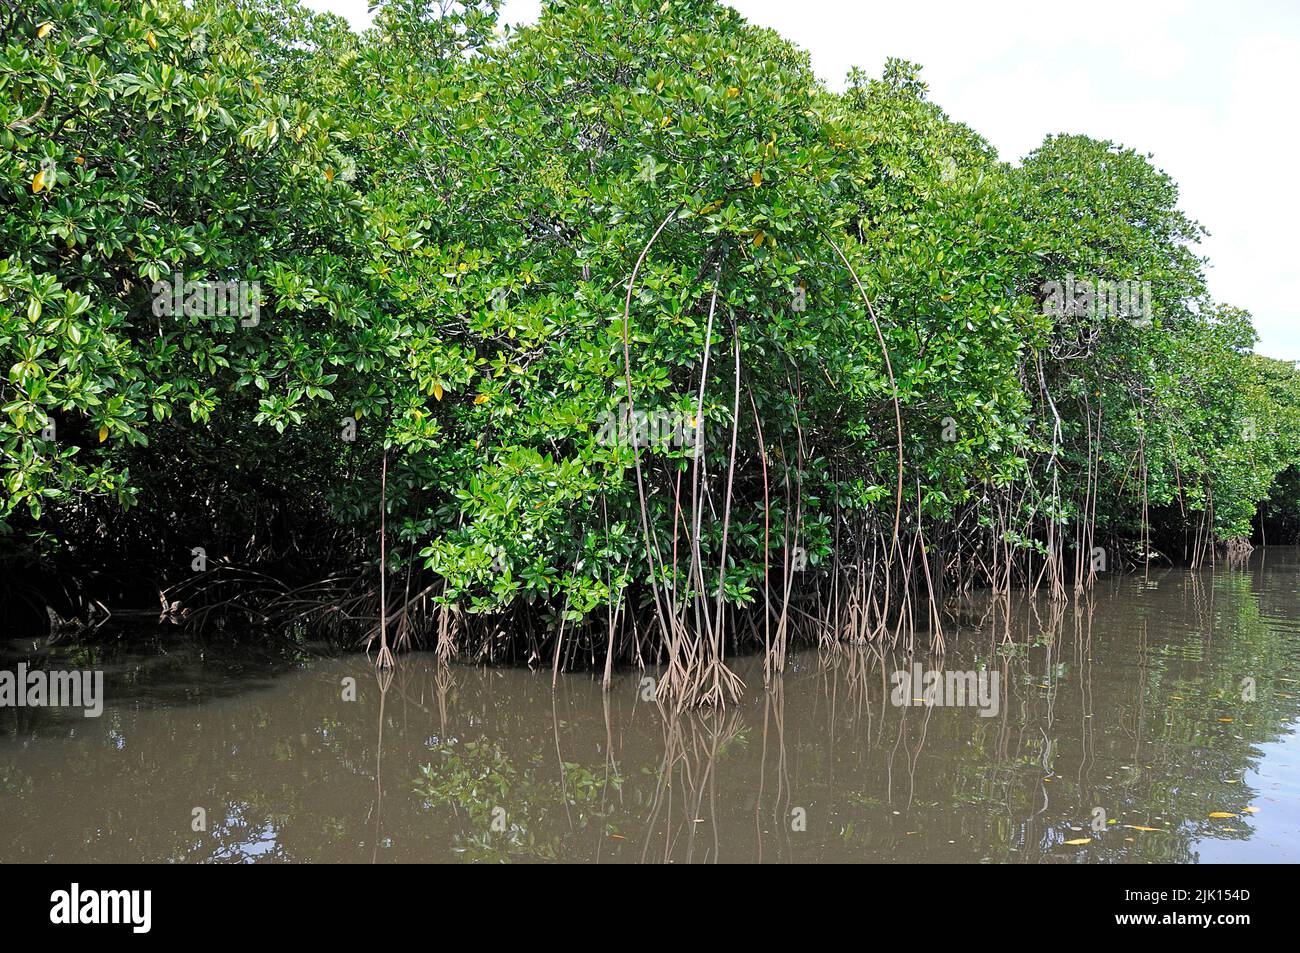 Mangroves (Rhizophoraceae) are protected worldwide, Yap, Micronesia, Pacific ocean, Asia Stock Photo